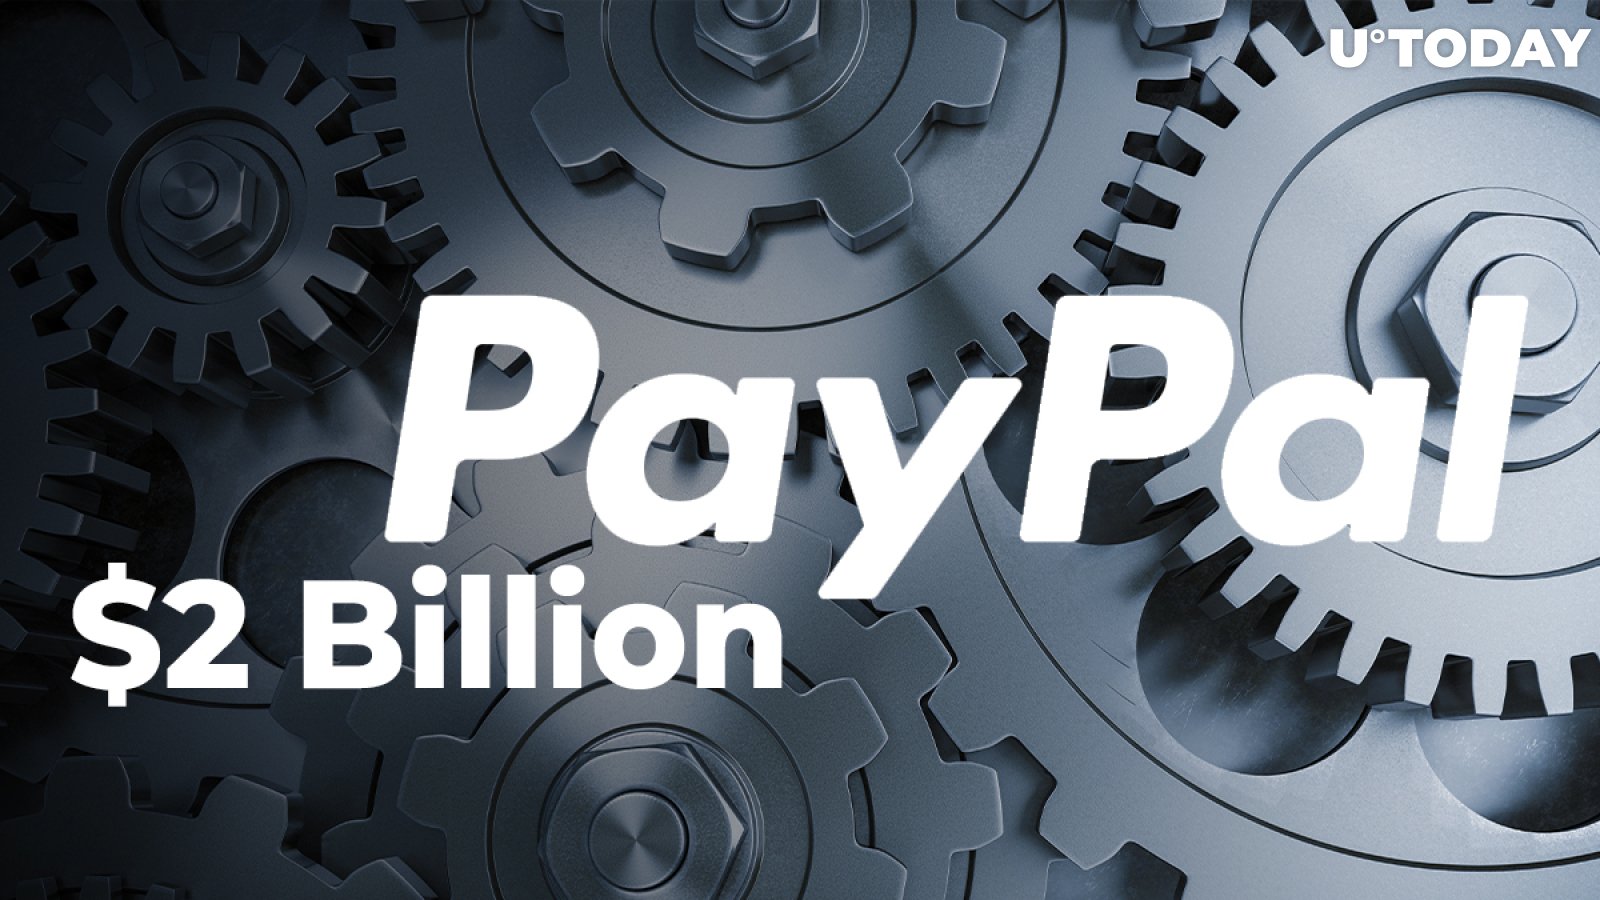 PayPal Expected to Generate $2 Billion Worth of Revenue from Bitcoin: Mizuho